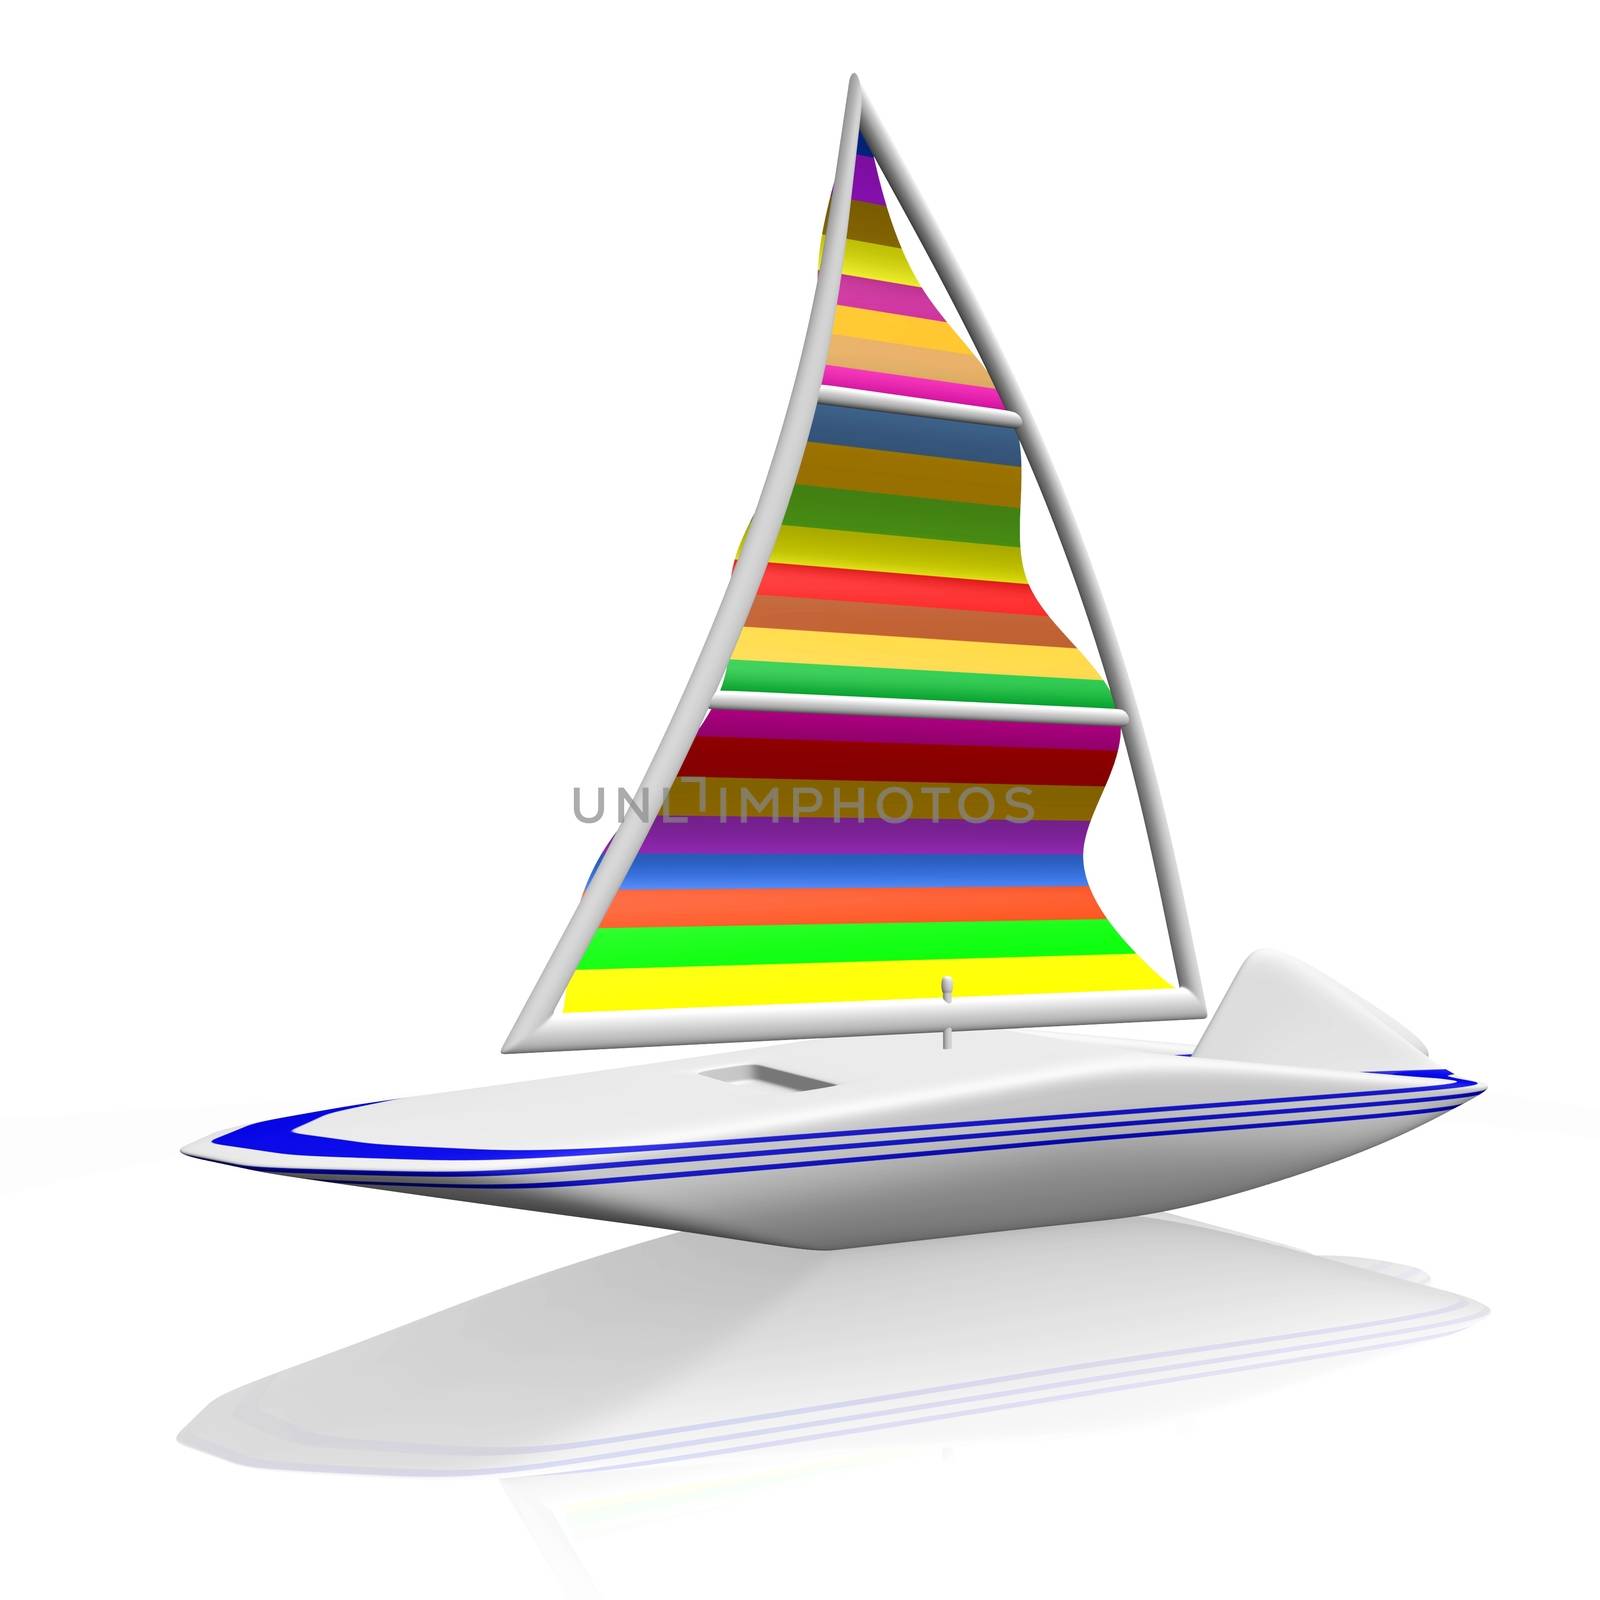 Wind Surfing Sail Boat Raft Canoe by RichieThakur